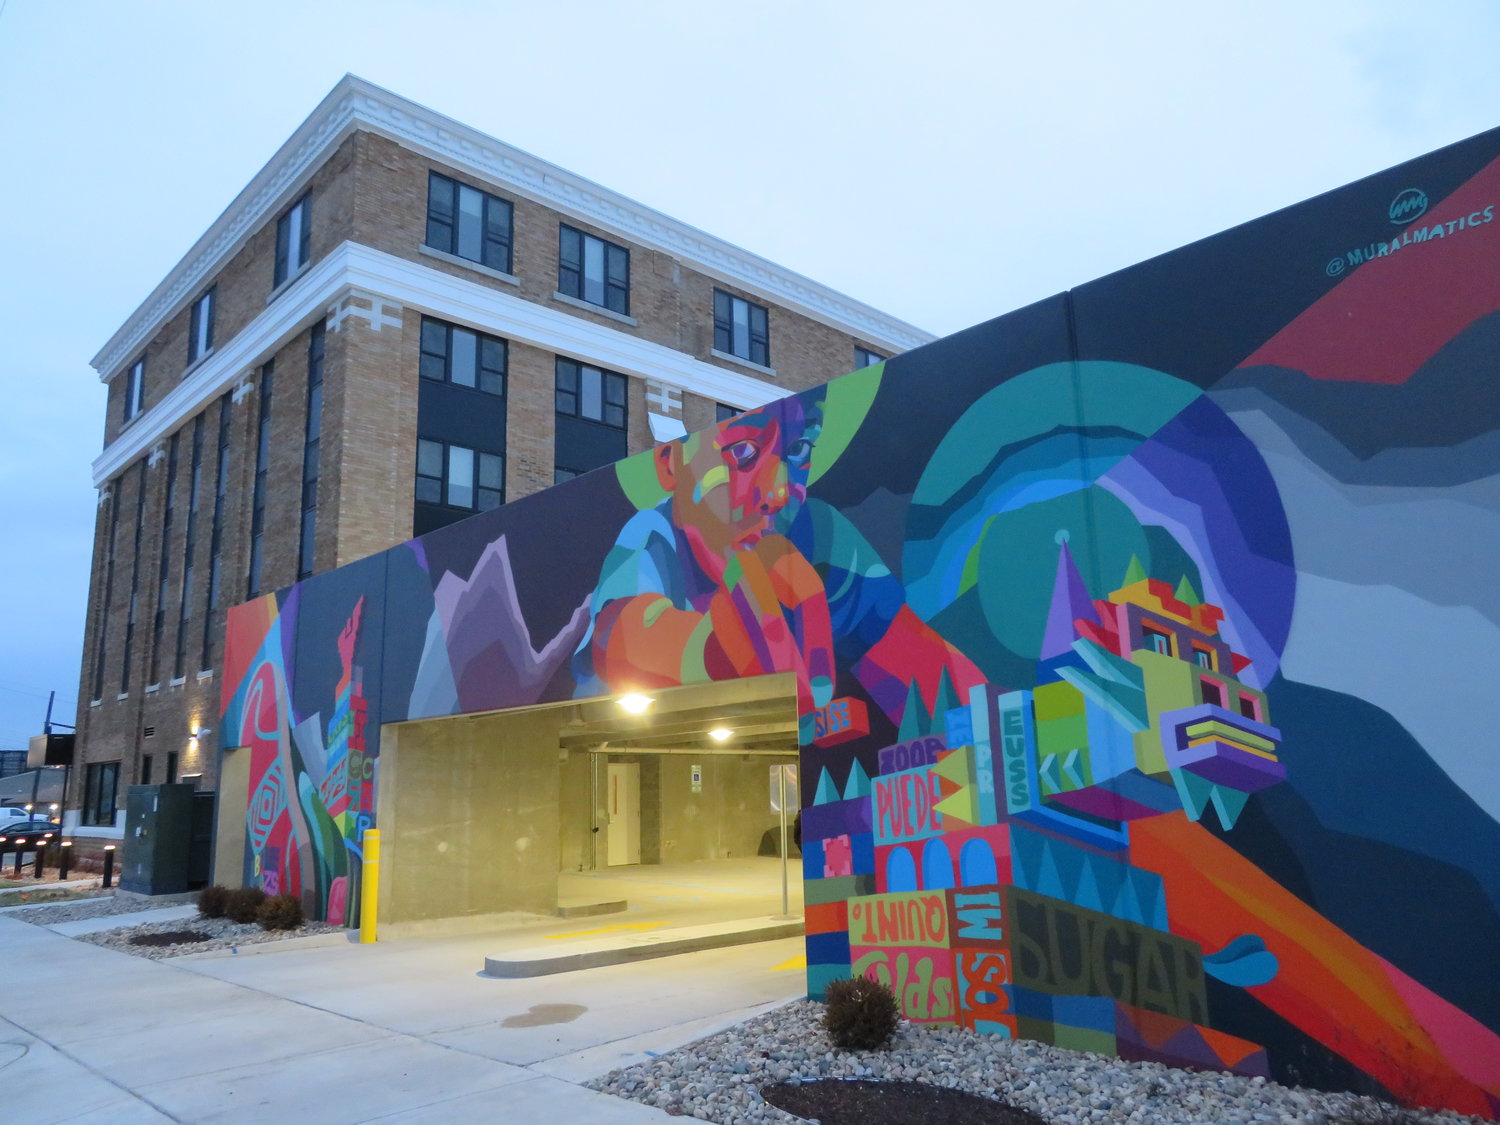 The parking garage is graced with a mural by Lansing artist Dustin Hunt that celebrates North Lansing history, with visual shout-outs to surrounding businesses like Zoobie’s, Preuss Pets and Elderly Instruments.